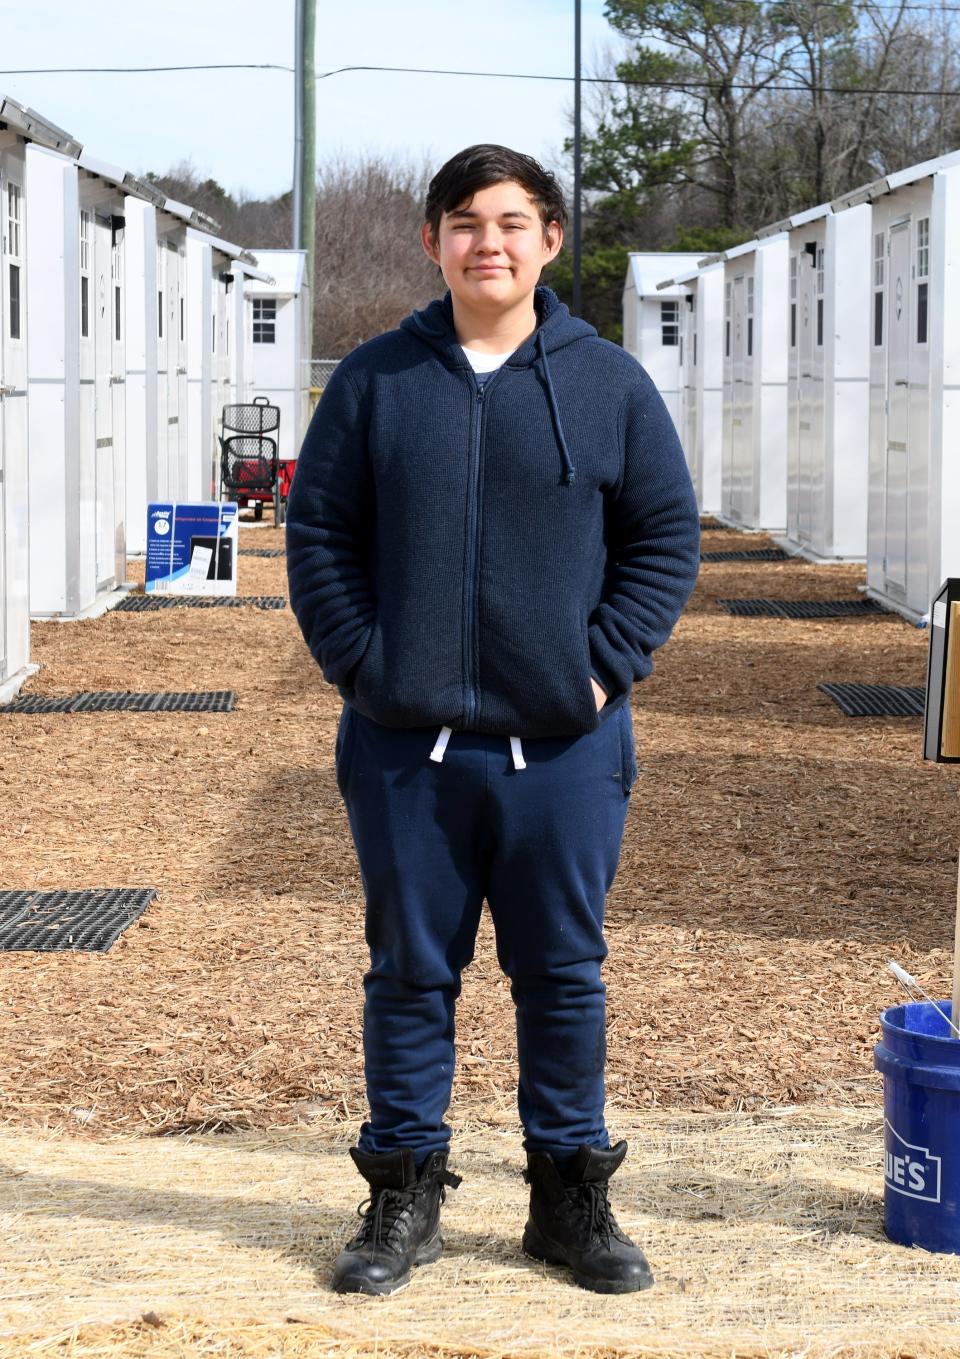 Jamie de la Cruz, 20, has struggled with chronic homelessness since aging out of foster care.